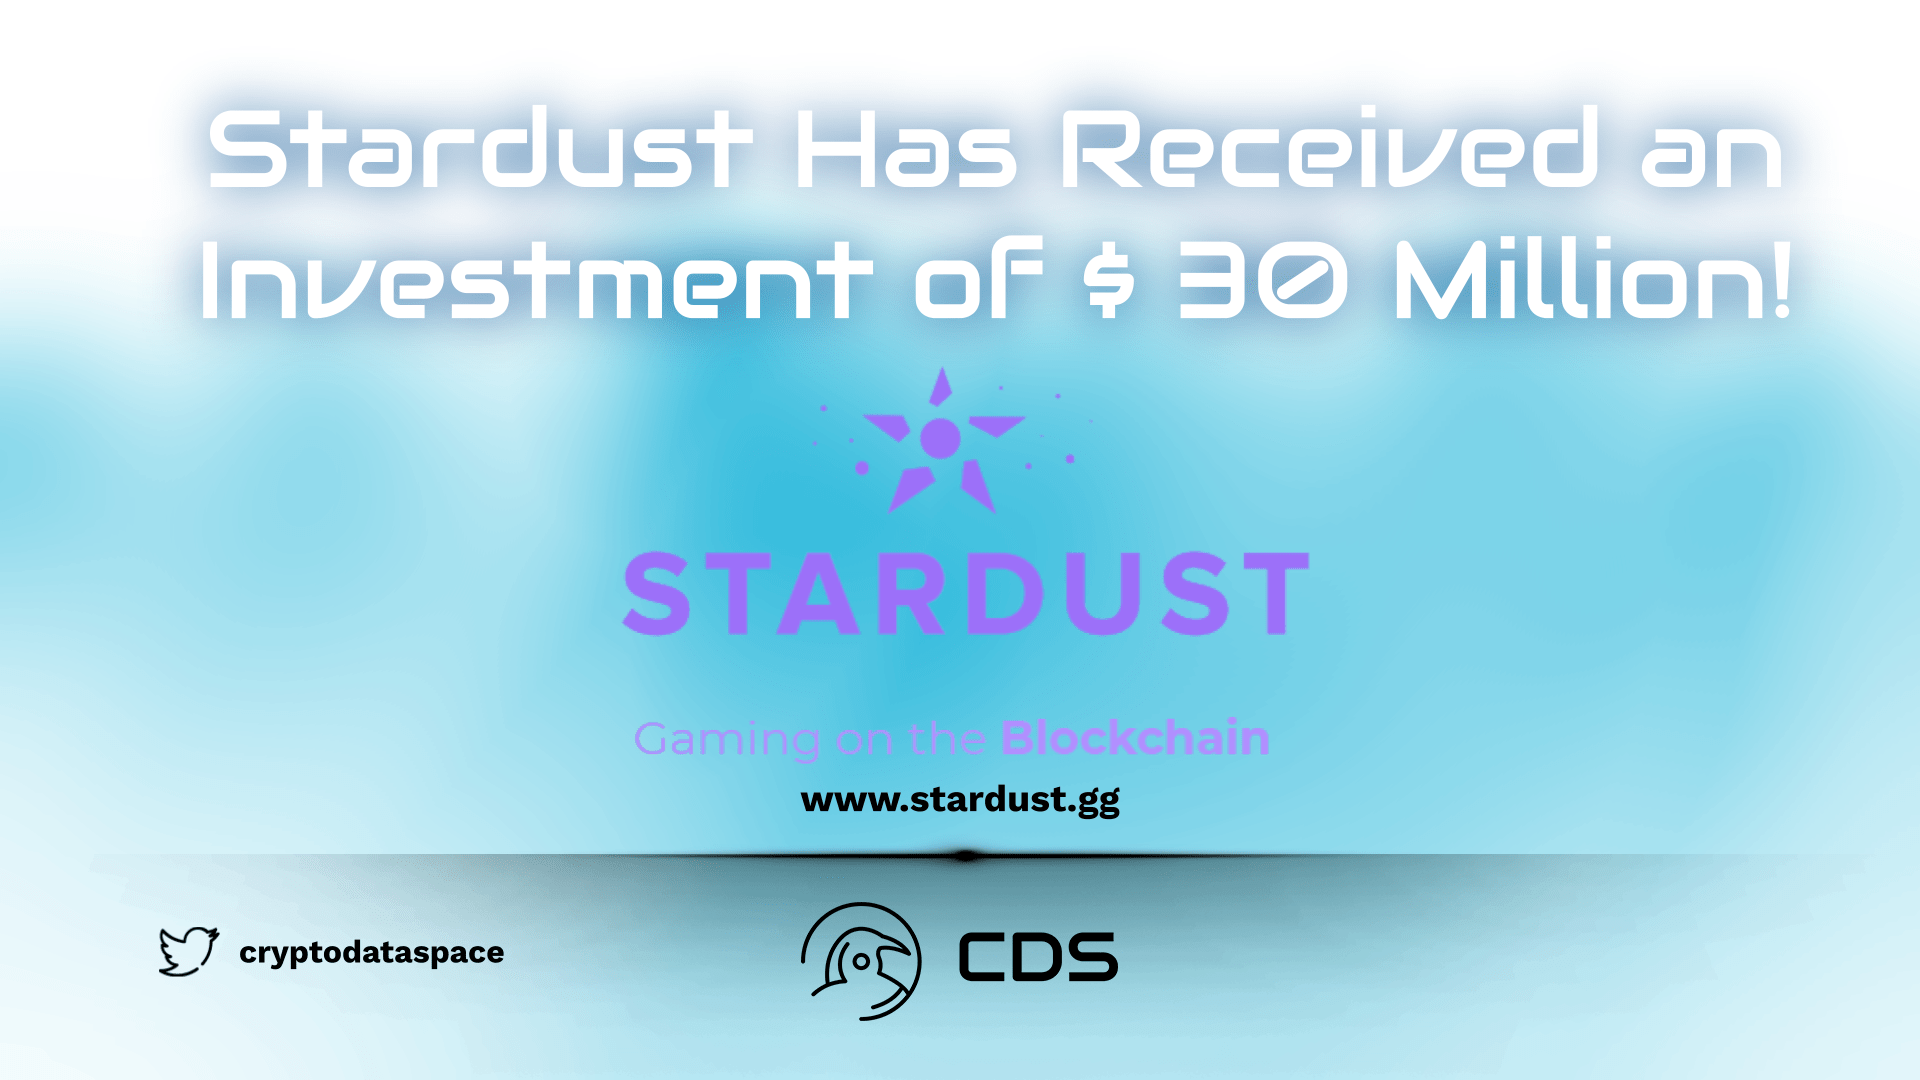 Stardust Has Received an Investment of $ 30 Million!